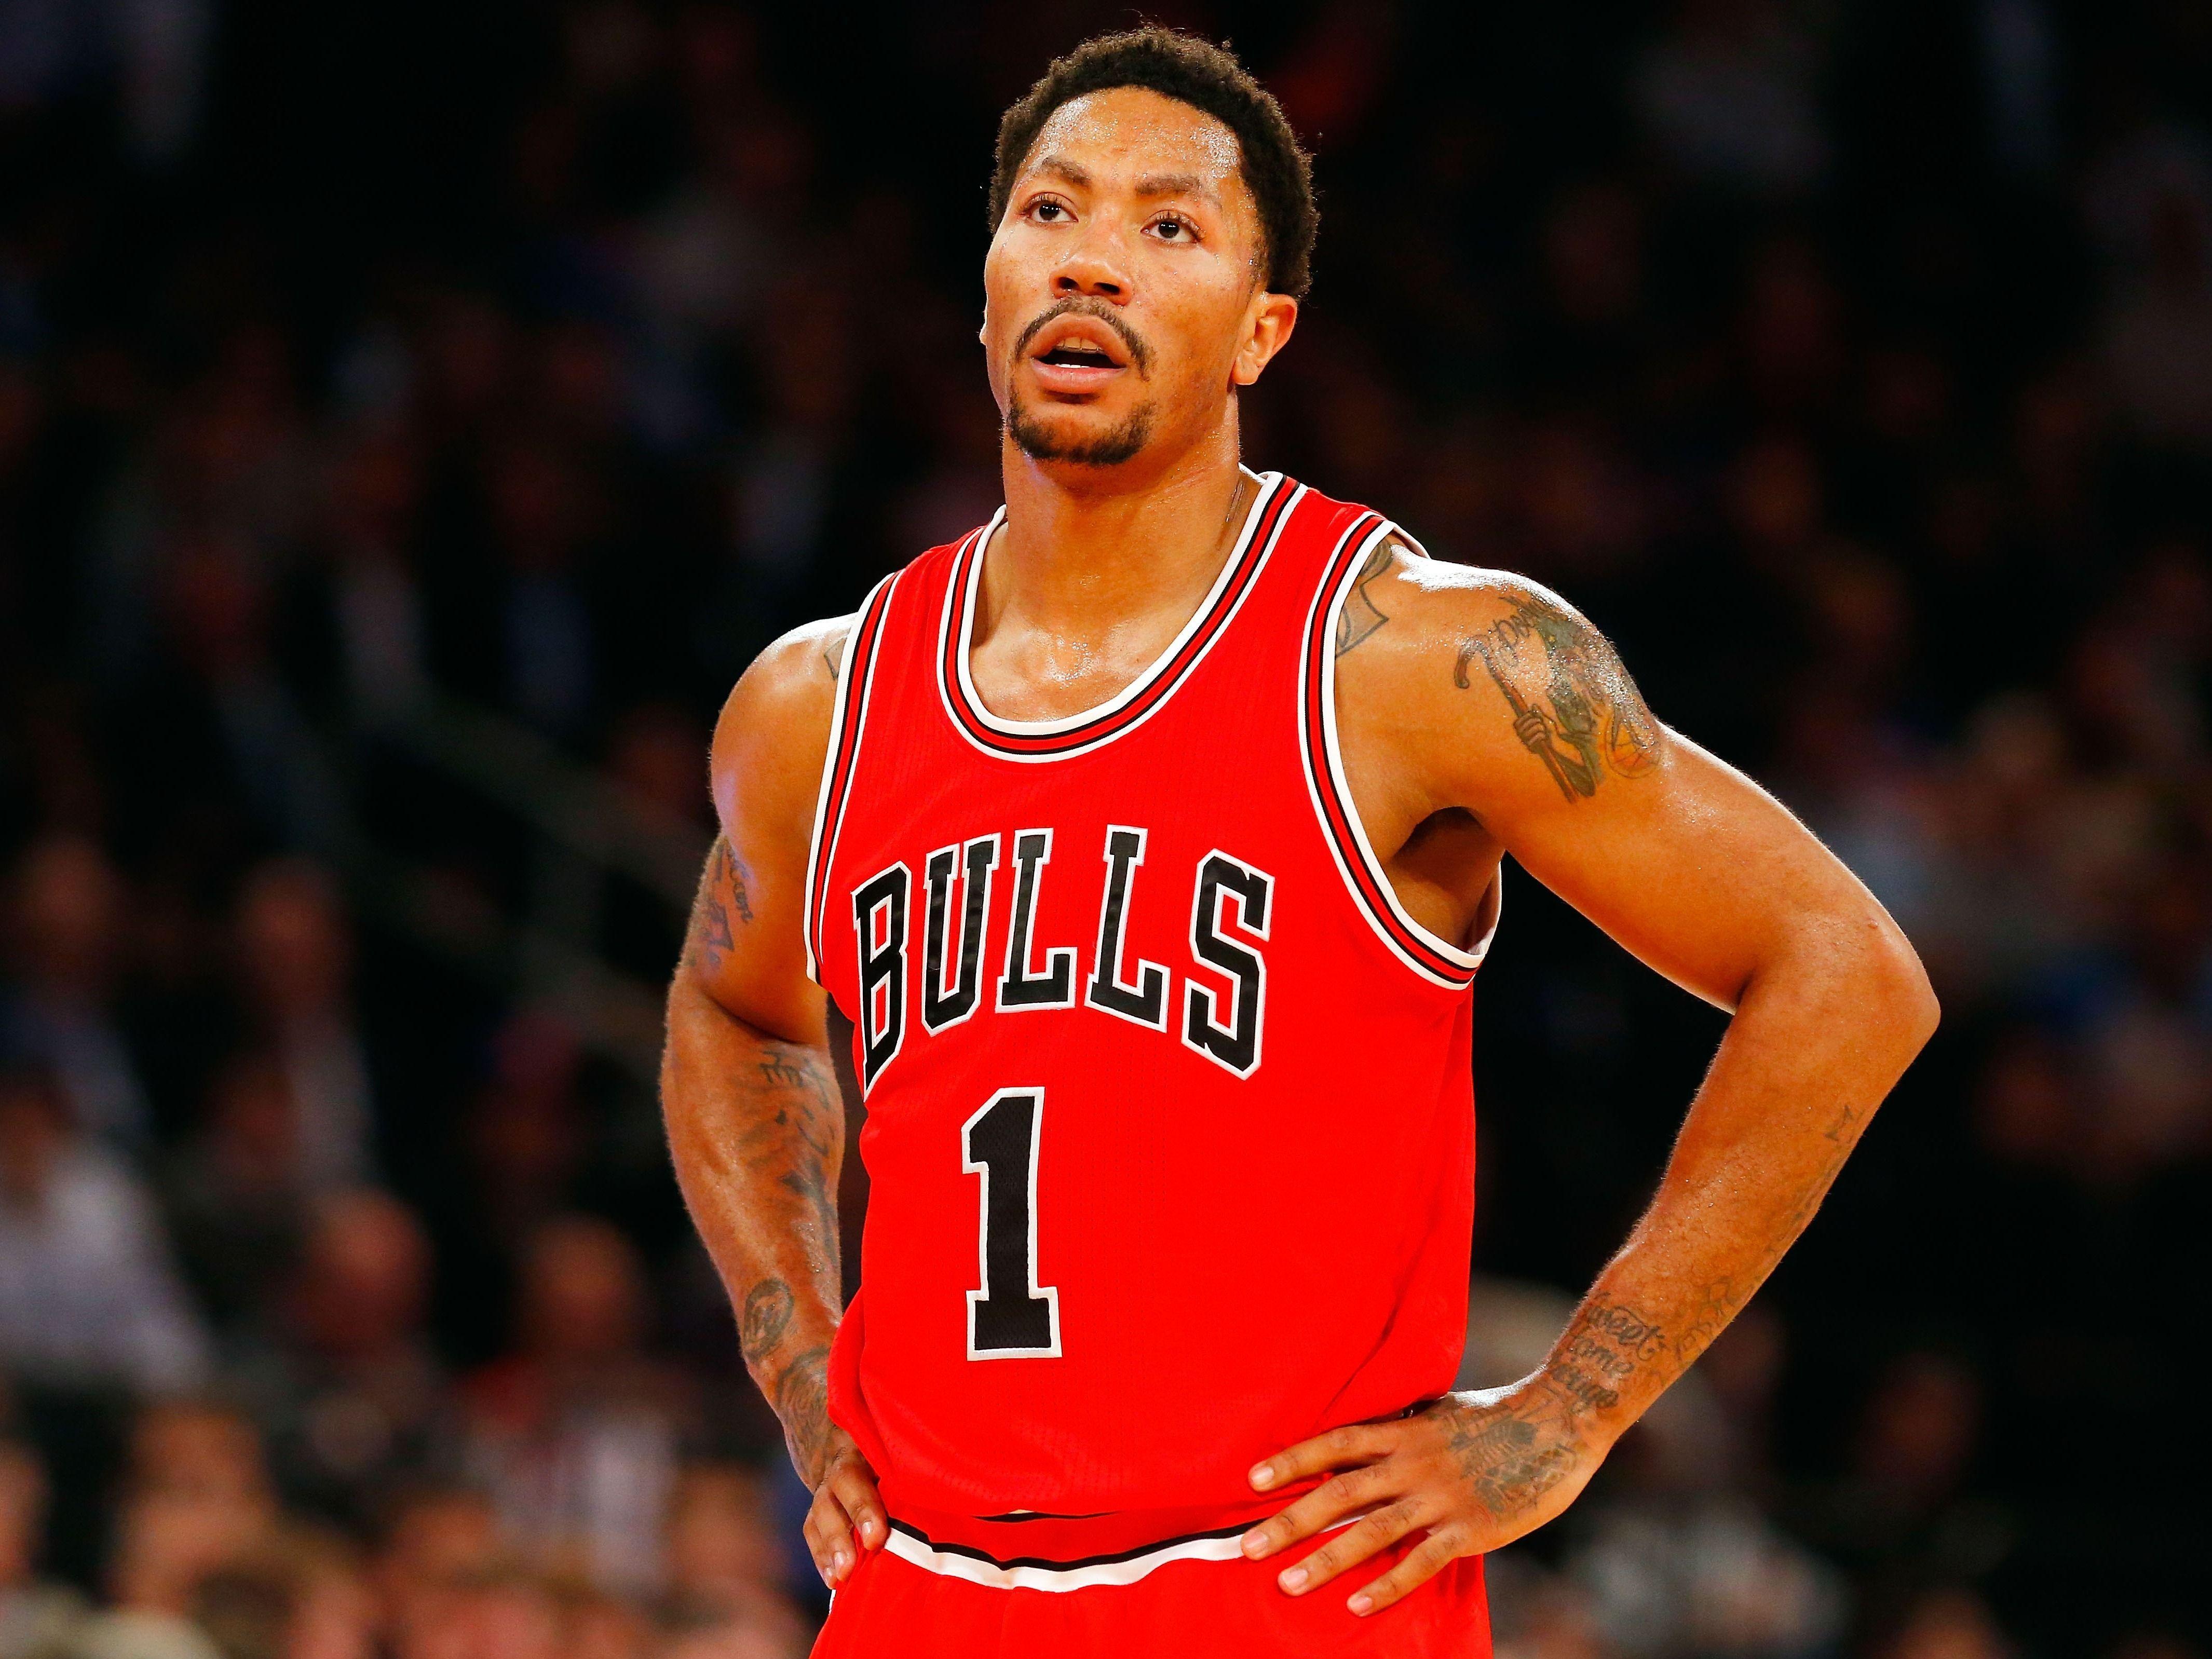 Awesome Derrick Rose HQ Wallpaper. Full HD Picture